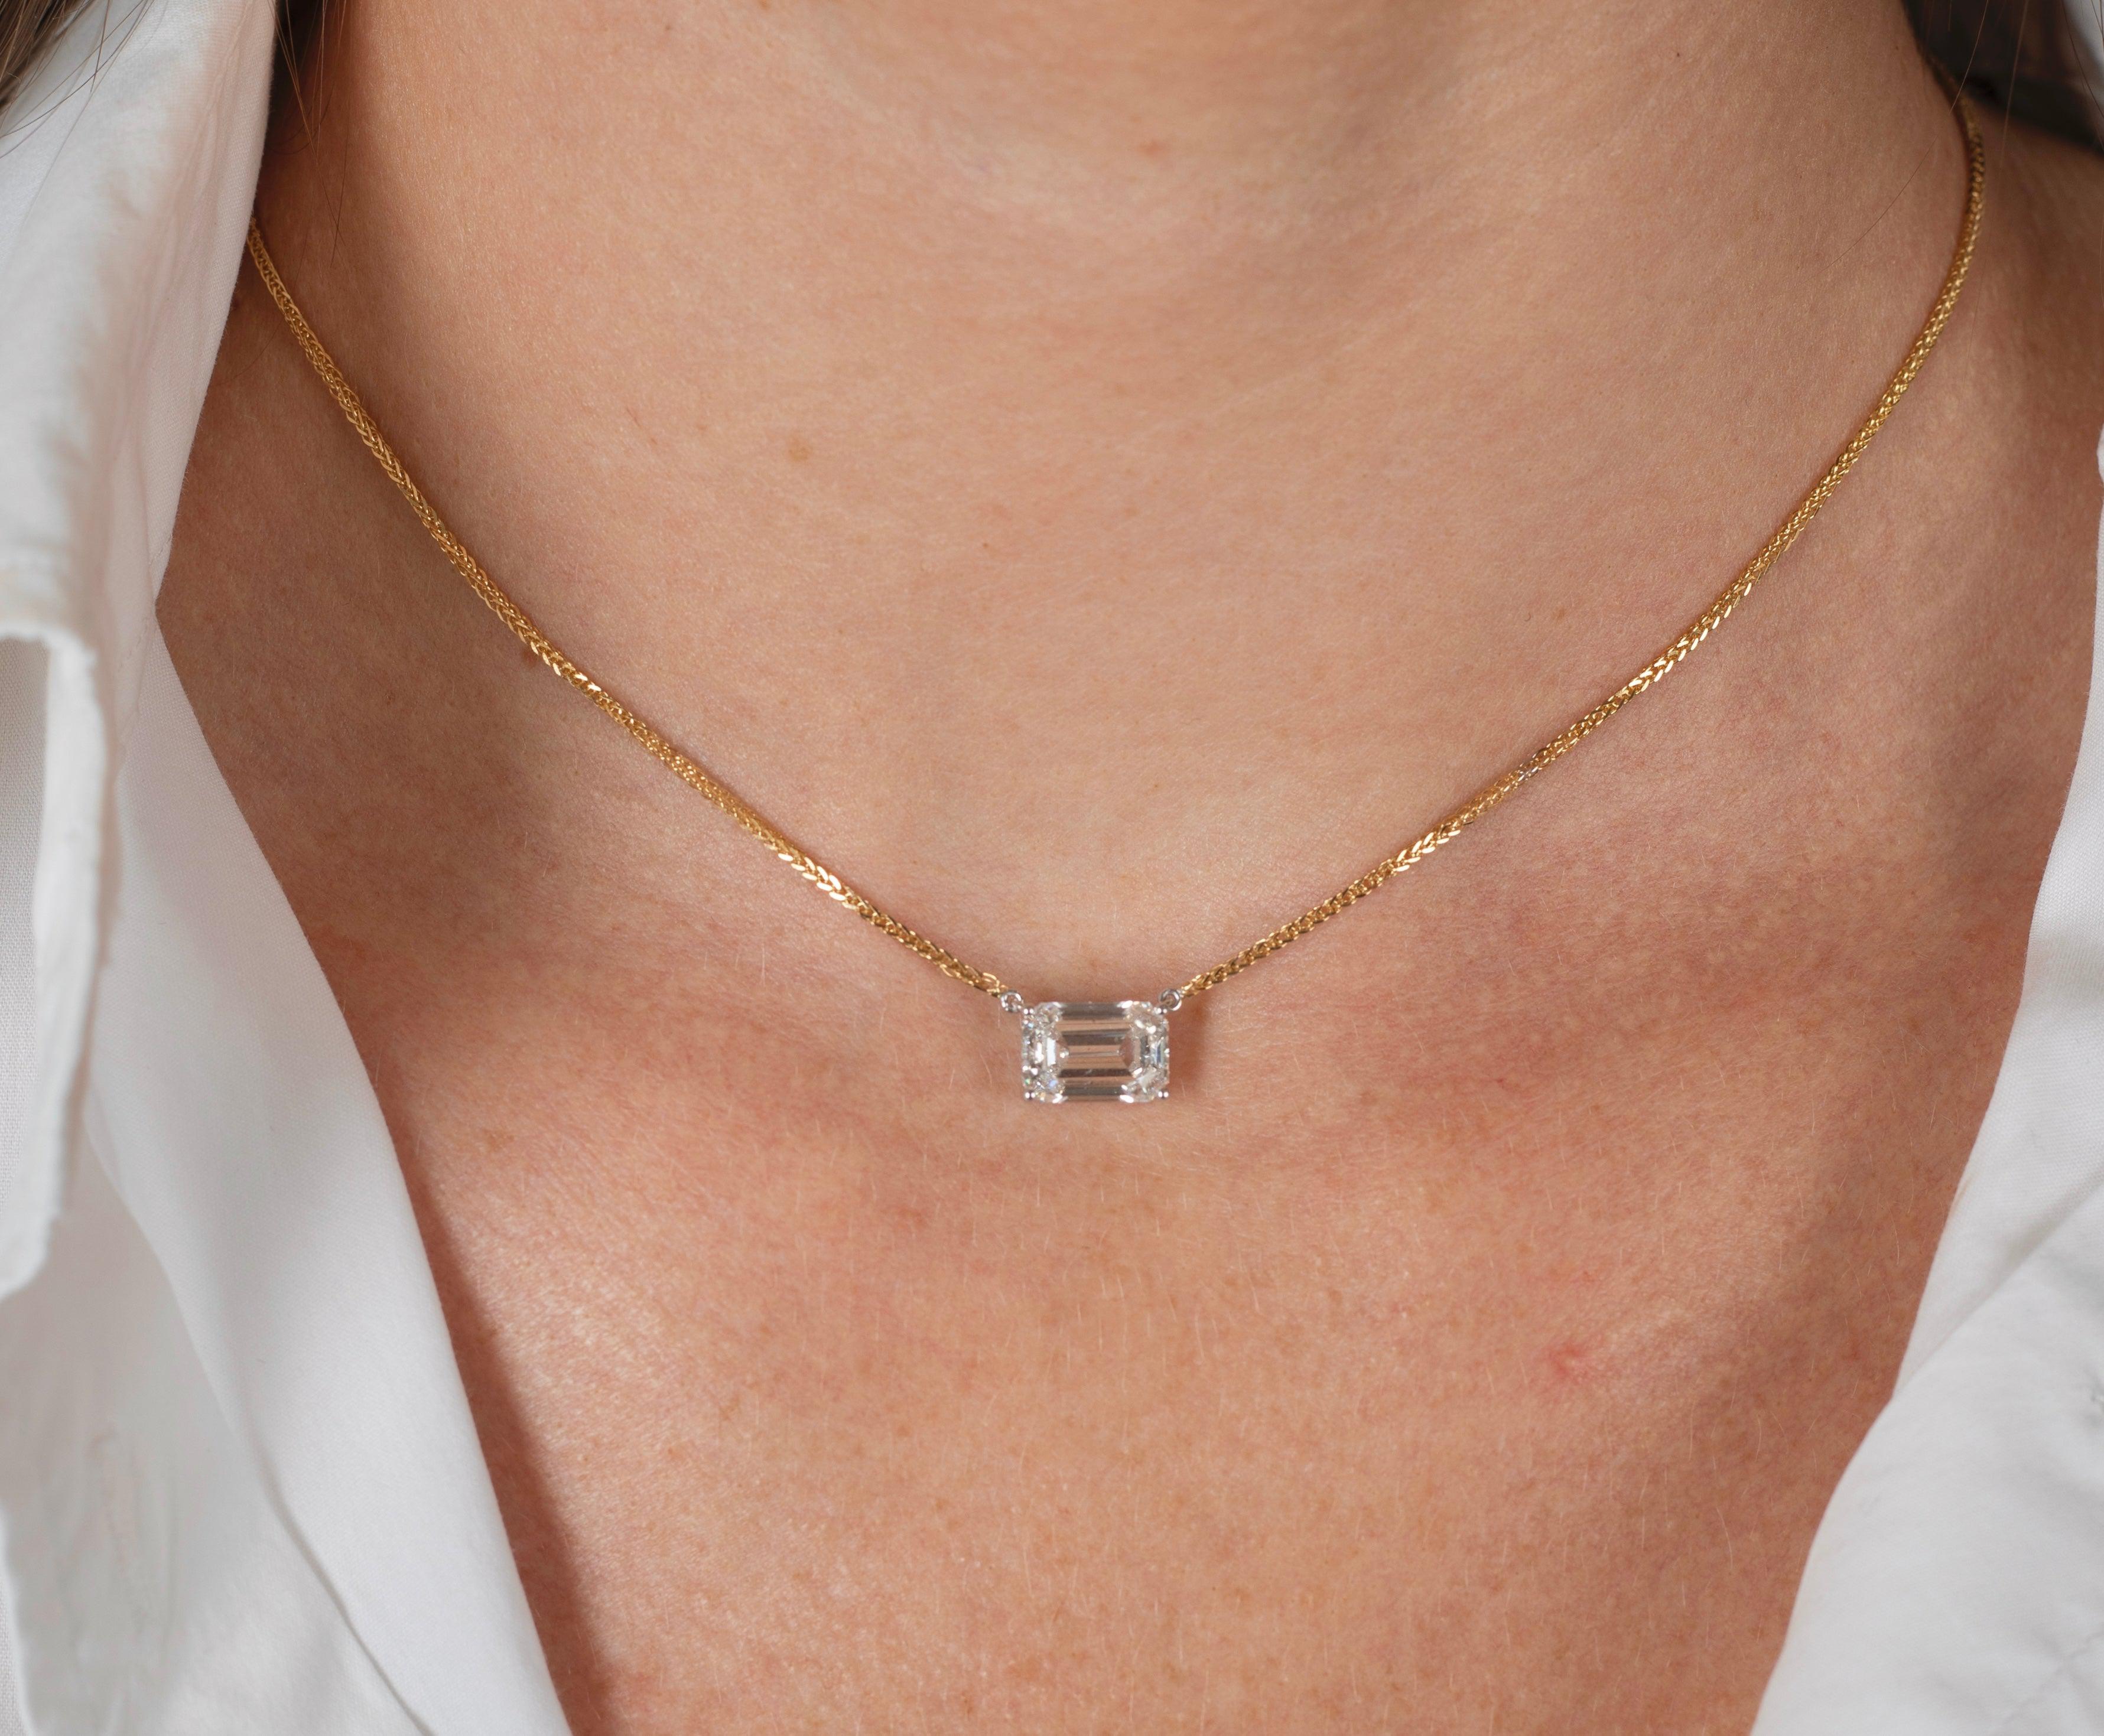 2-Carat-Emerald-Cut-Lab-Grown-Diamond-Connected-Floating-Necklace-in-18K-Yellow-White-Gold-2-Tone-Setting-Necklace-2.jpg